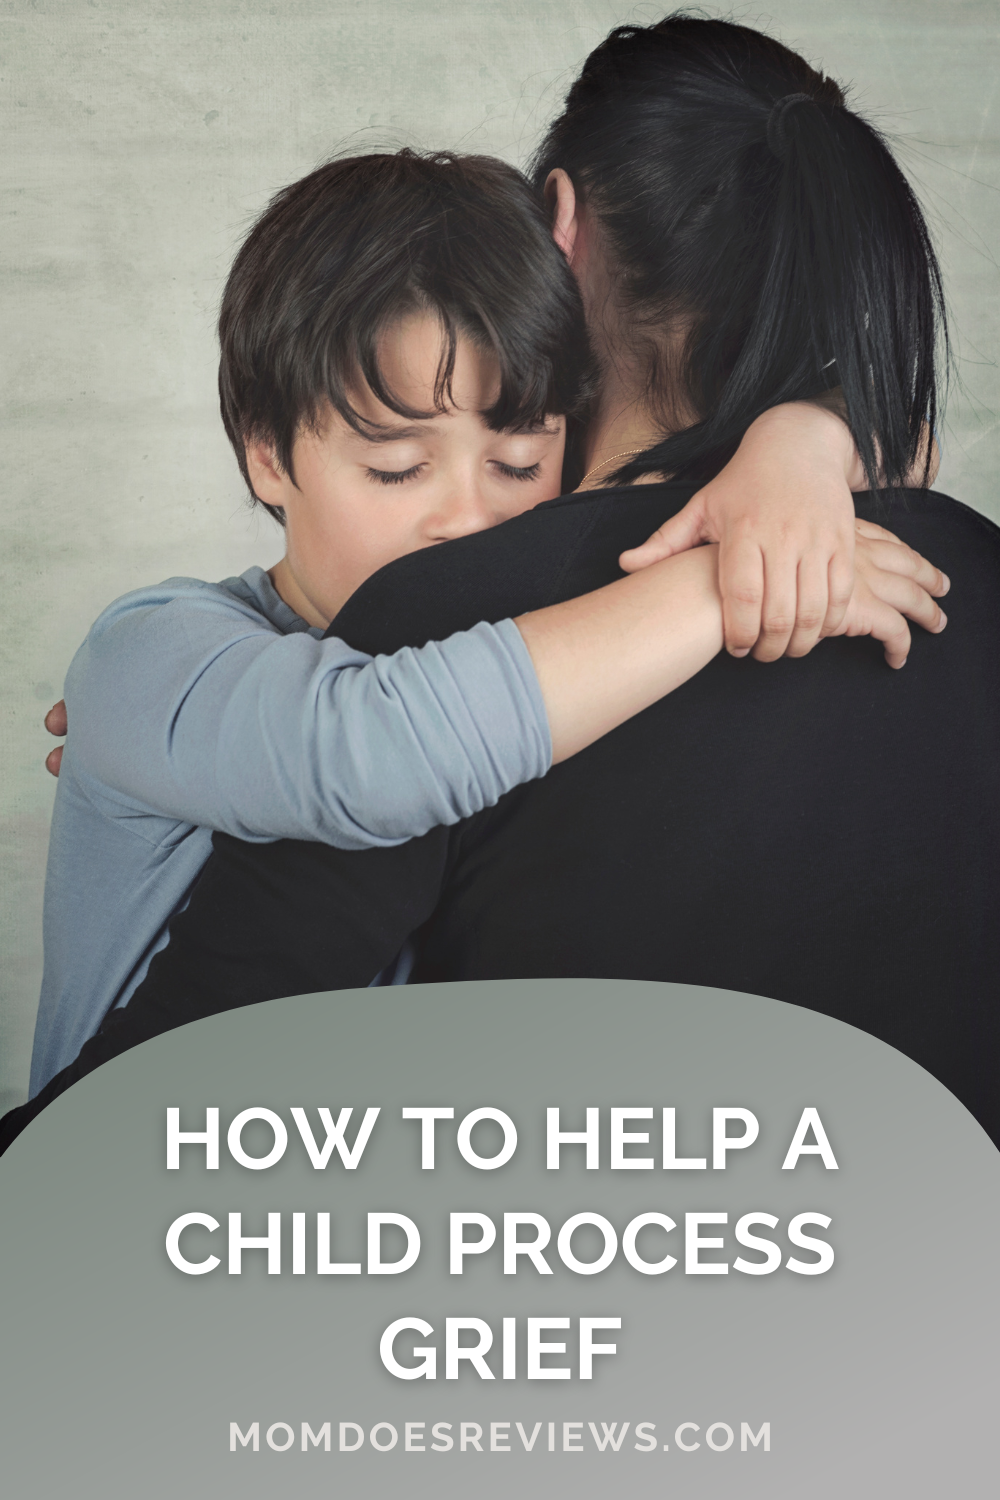 How To Help A Child Process Grief